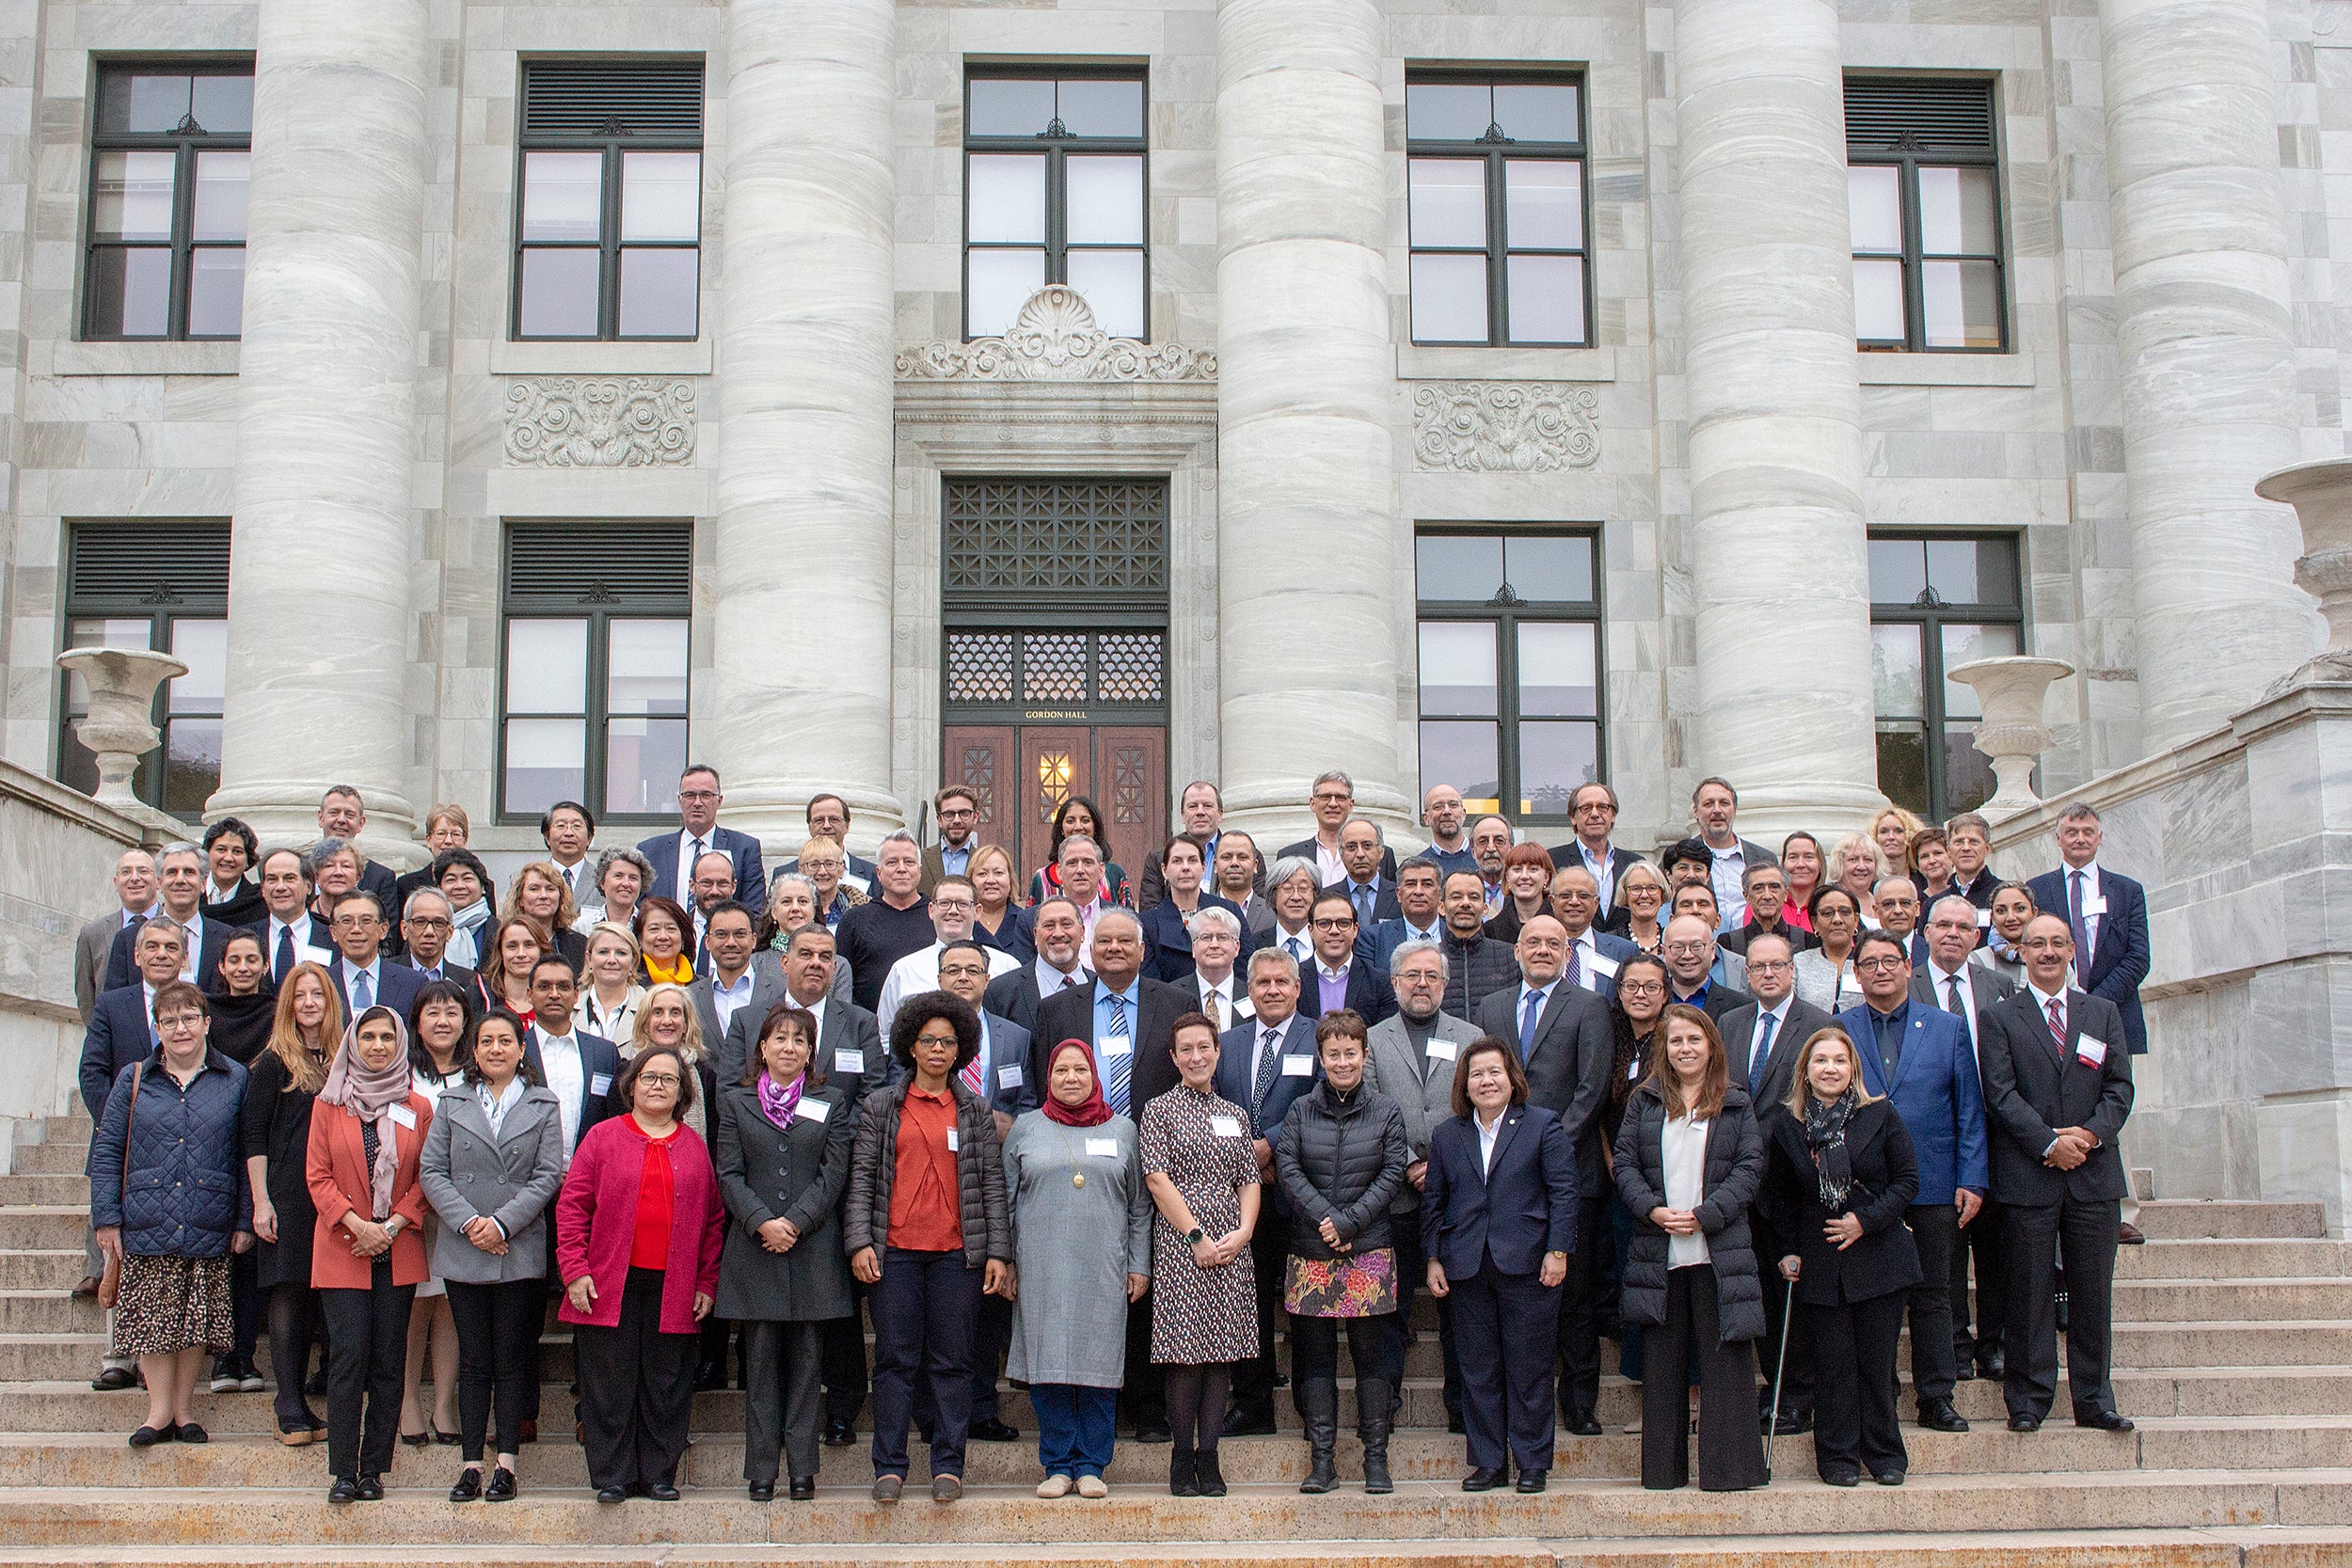 Group photo of symposium participants on the steps of Harvard Medical School